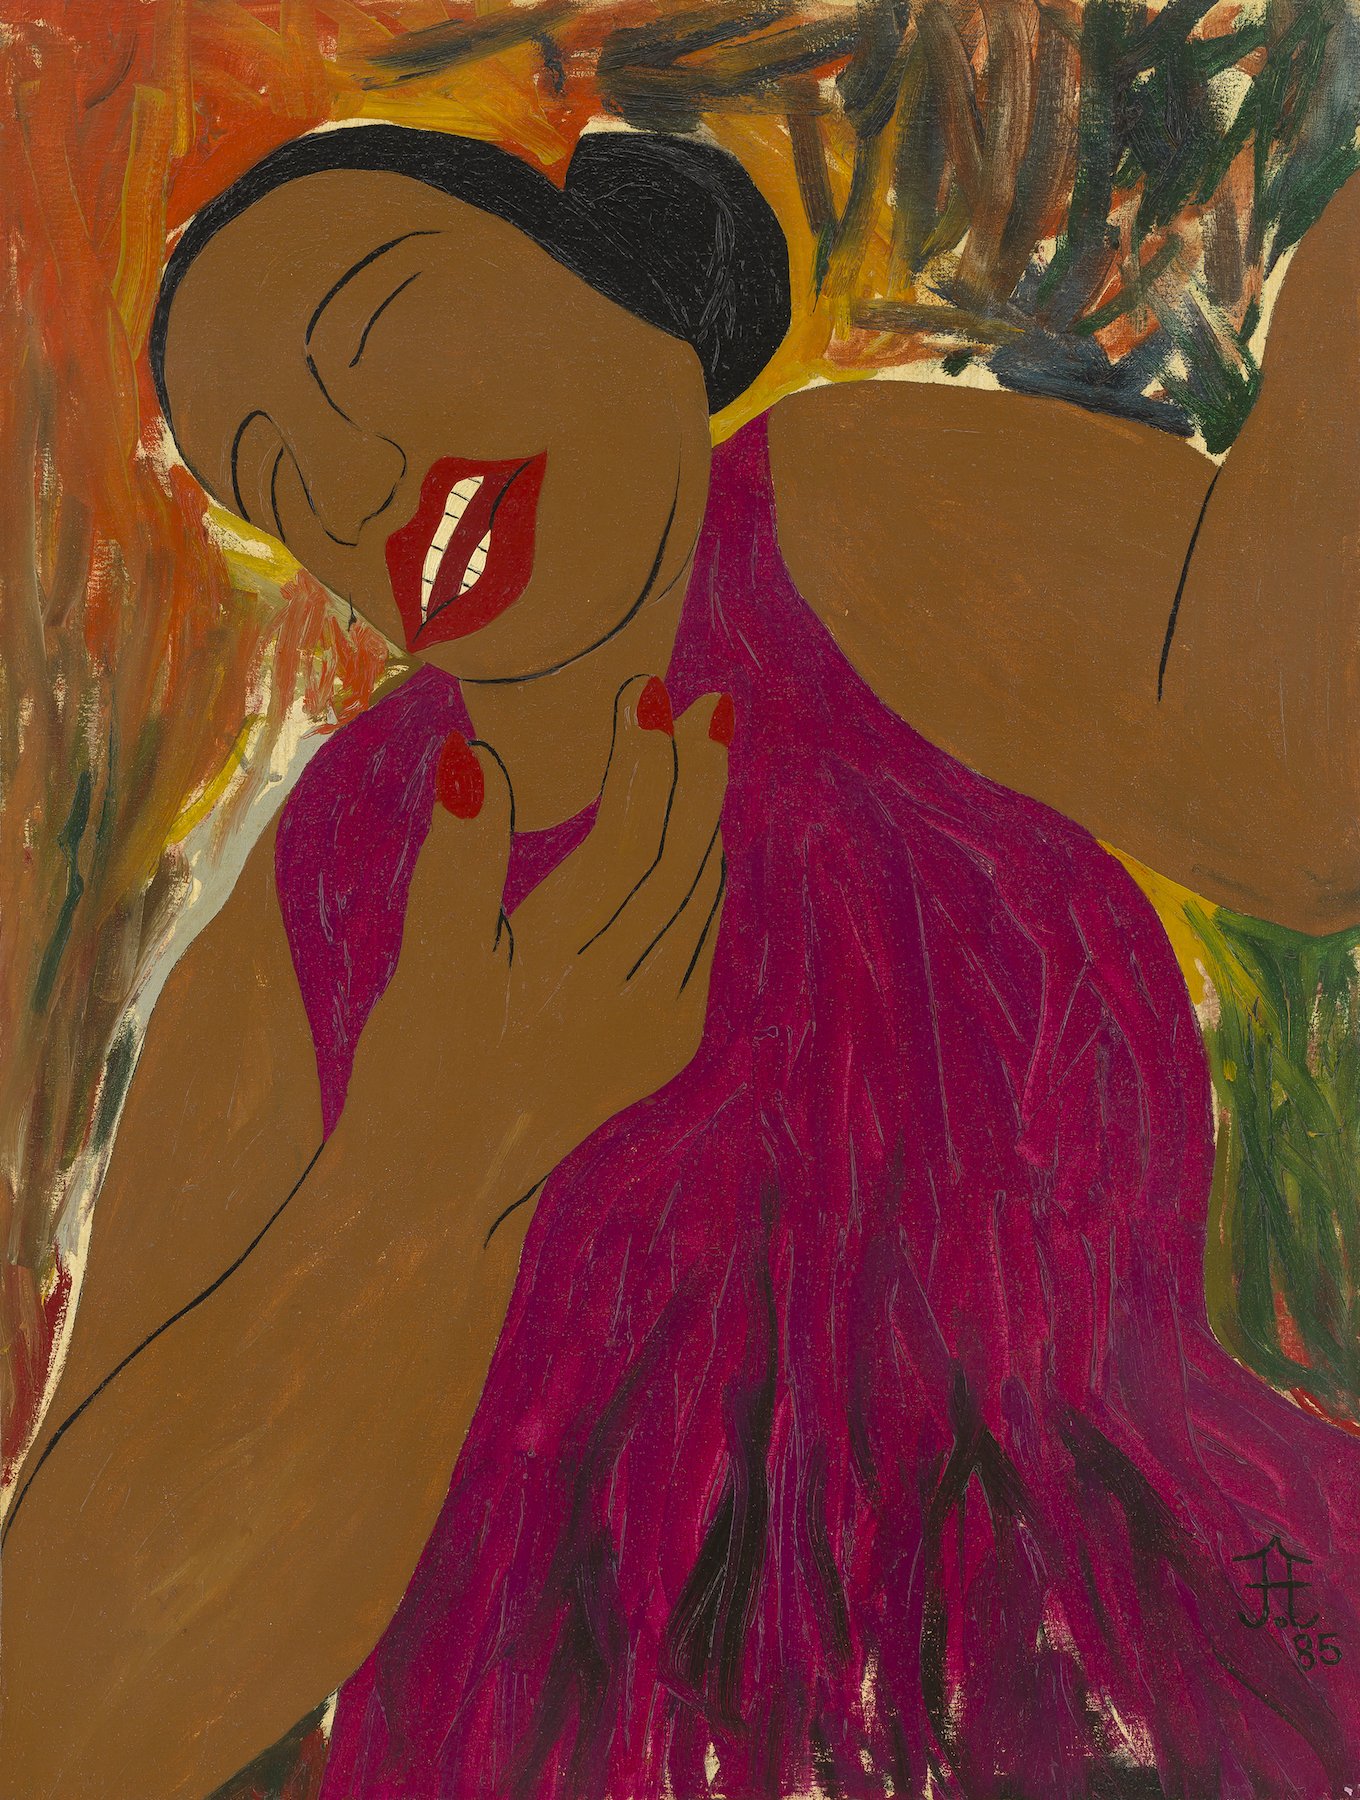 Frank Diaz Escalet: # Sing Me the Blues # April 29 - June 24, 2022 &lt;alt="Waist up portrait of Bessie Smith singing in red lipstick and nails, and a magenta dress."&gt;